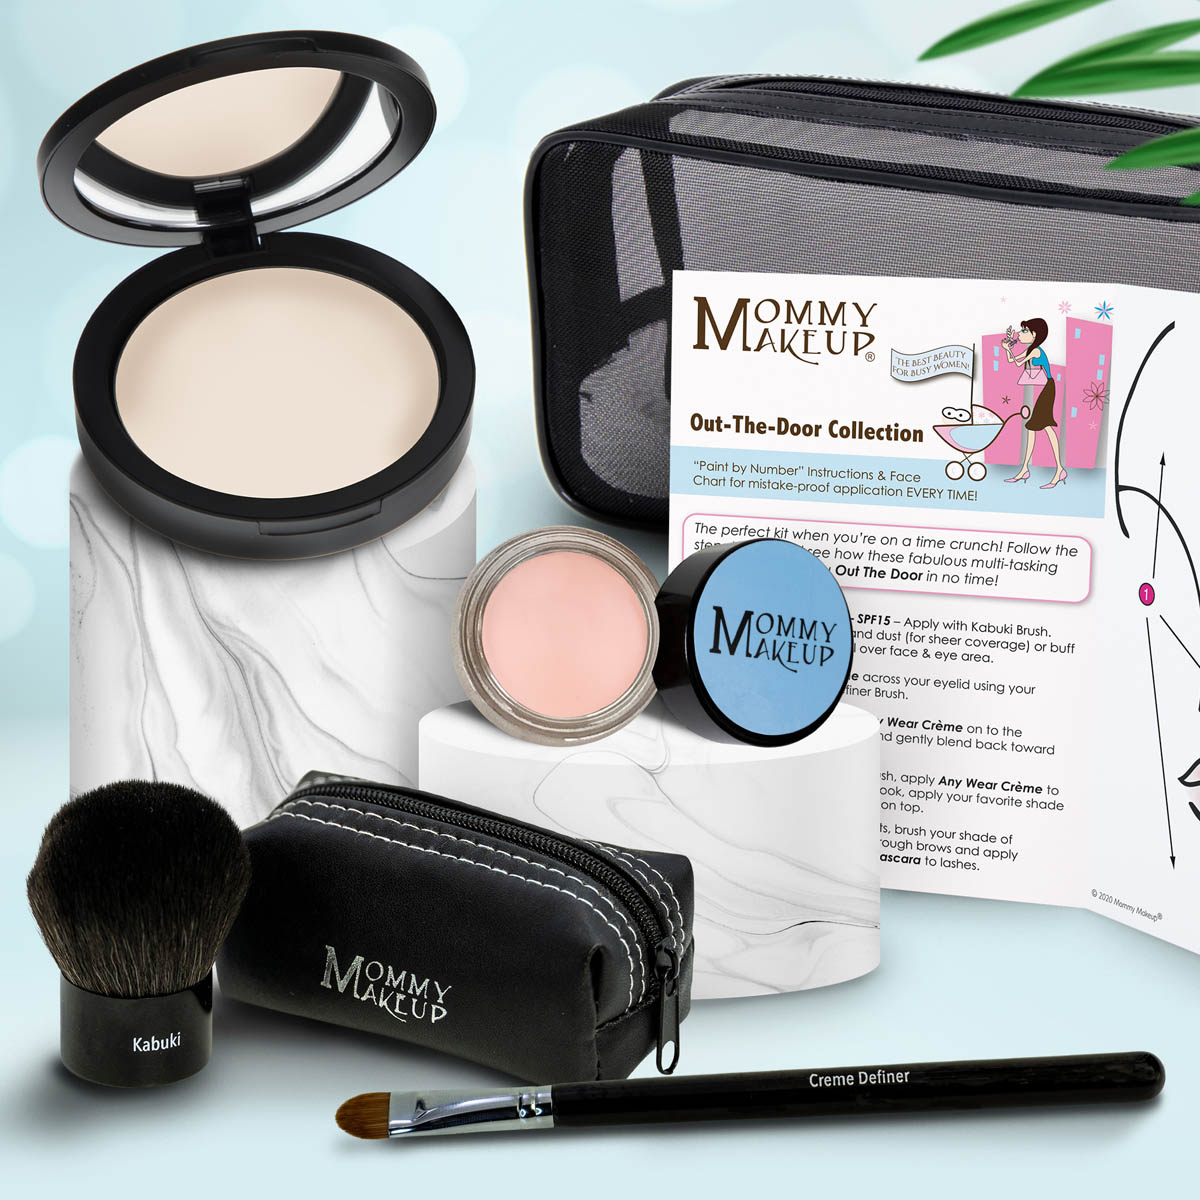 This fabulous yet simple multi-tasking mineral makeup kit will give you a sophisticated look and get you out-the-door in no time! Talc-free, paraben-free, NO Animal Testing.#color_lullaby-light-for-porcelain-to-very-fair-complexions-tends-to-burn-easily